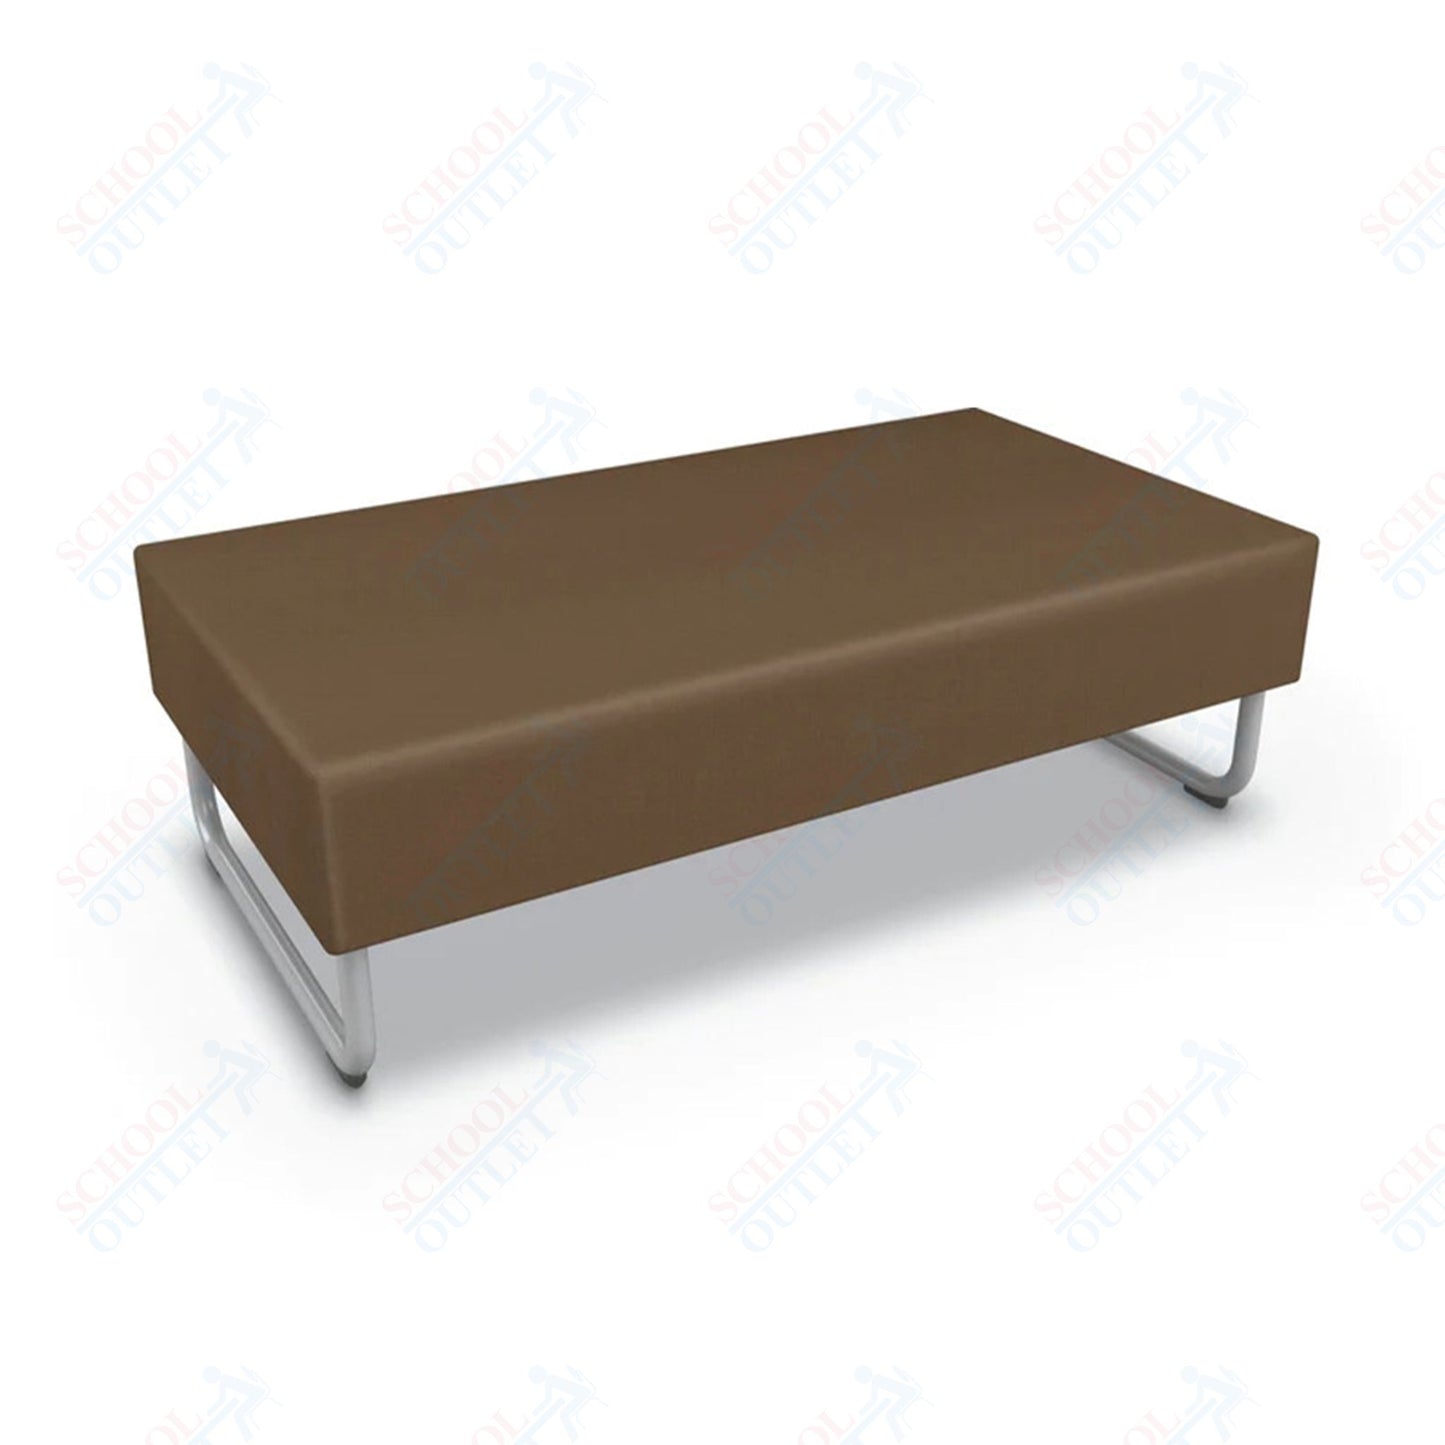 Mooreco Akt Soft Seating Lounge Loveseat Bench - Grade 02 Fabric and Powder Coated Sled Legs